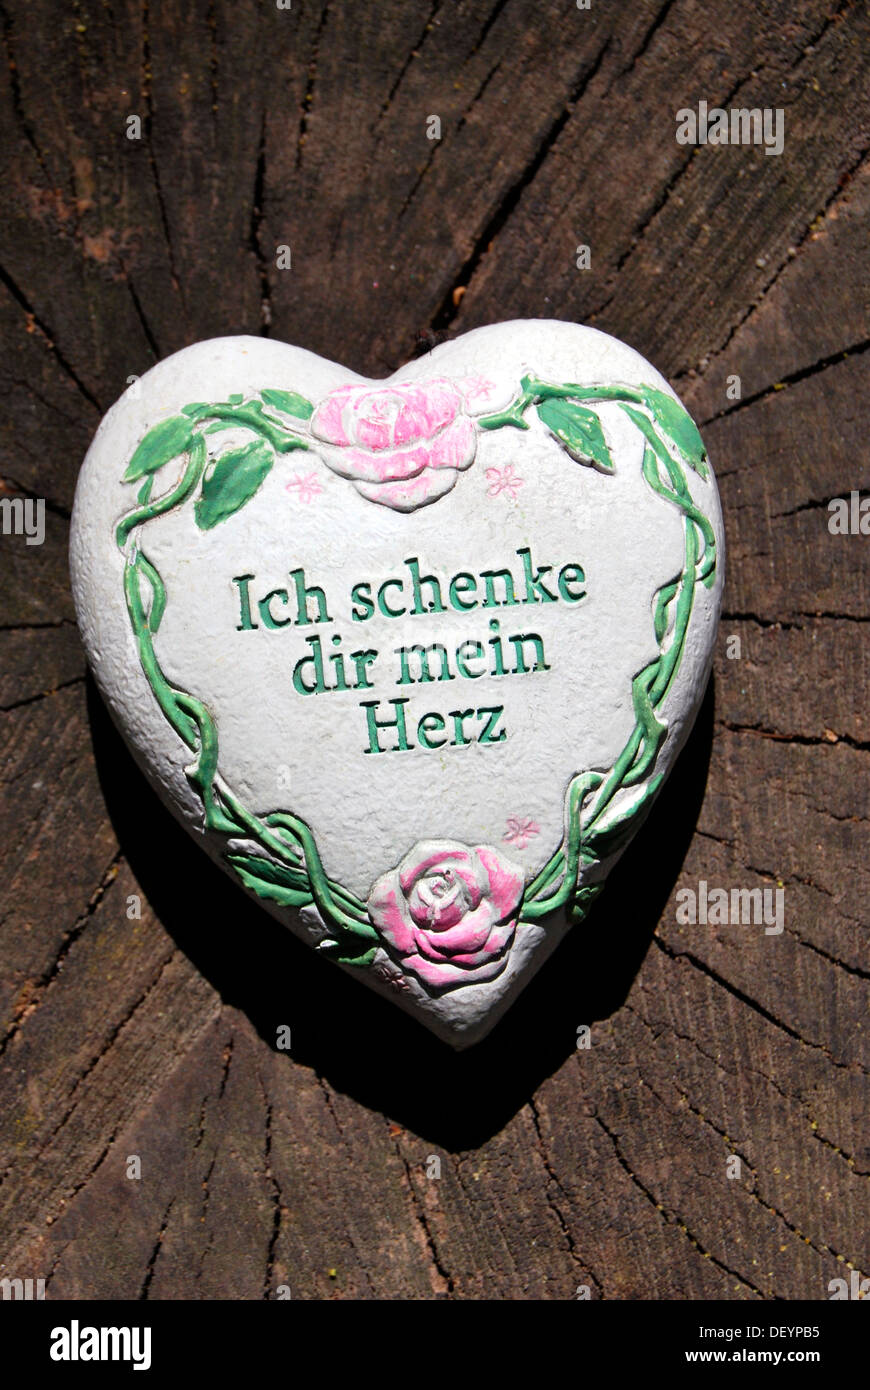 Heart with the words 'Ich schenke dir mein Herz' I give you my heart, on a trunk Stock Photo